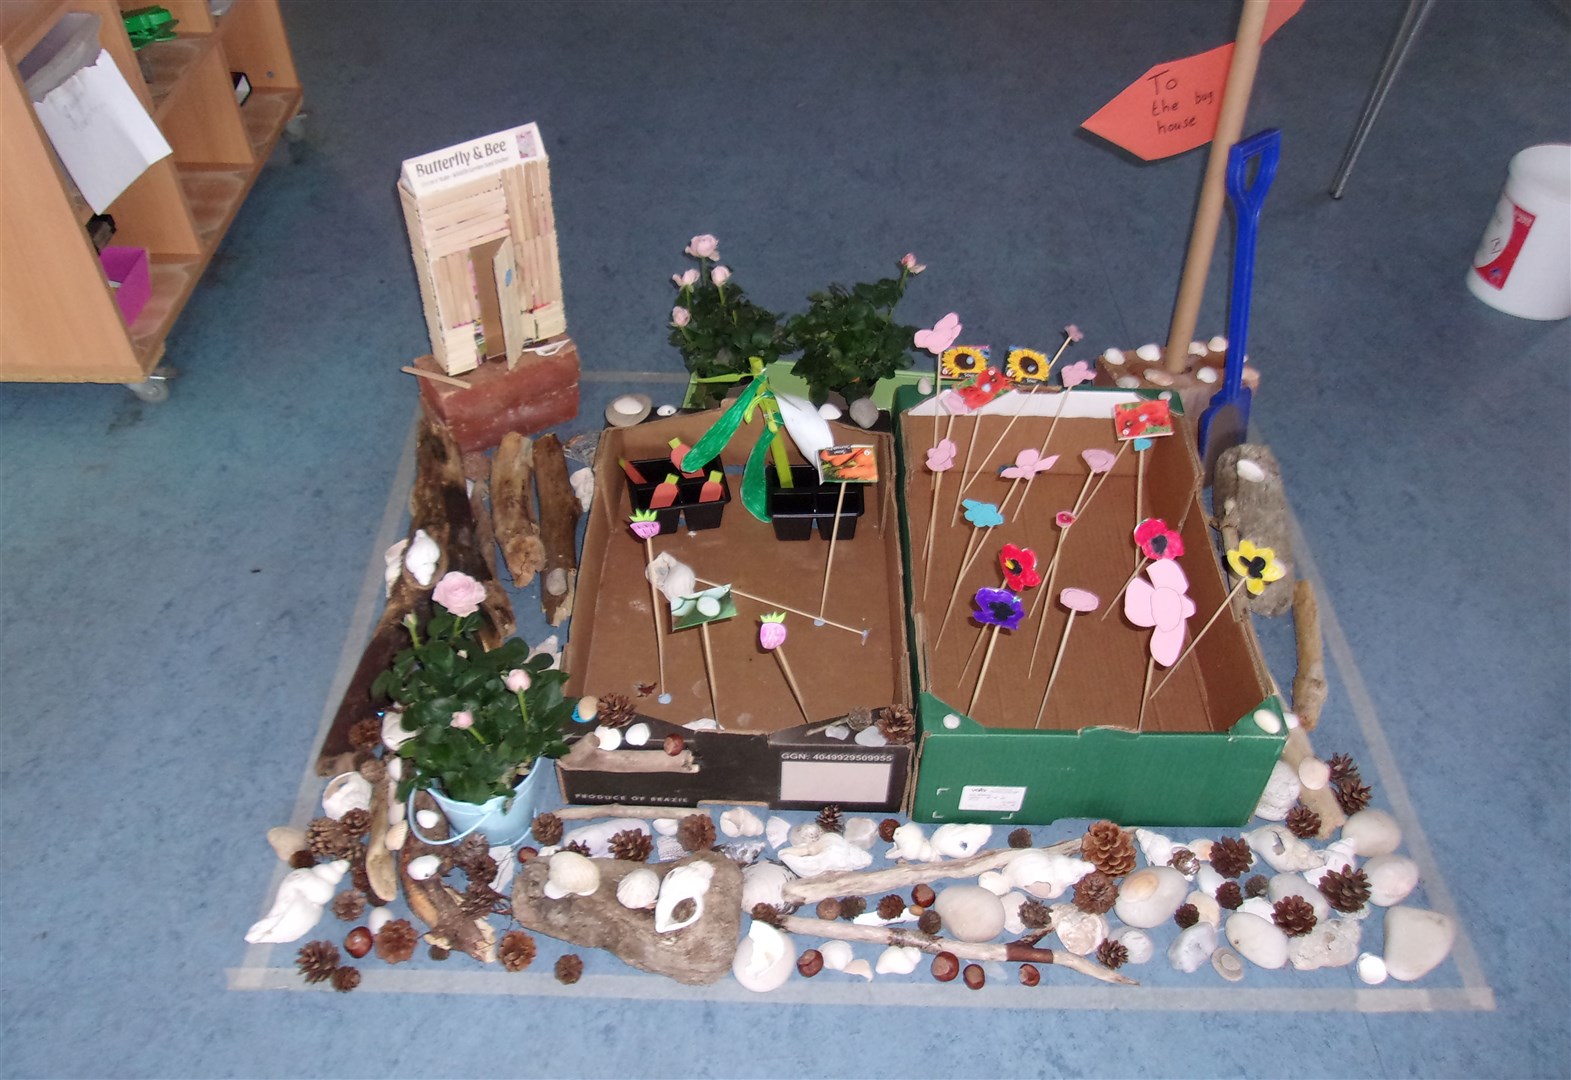 Children as young as three at Junior World Nairn helped create this entry.